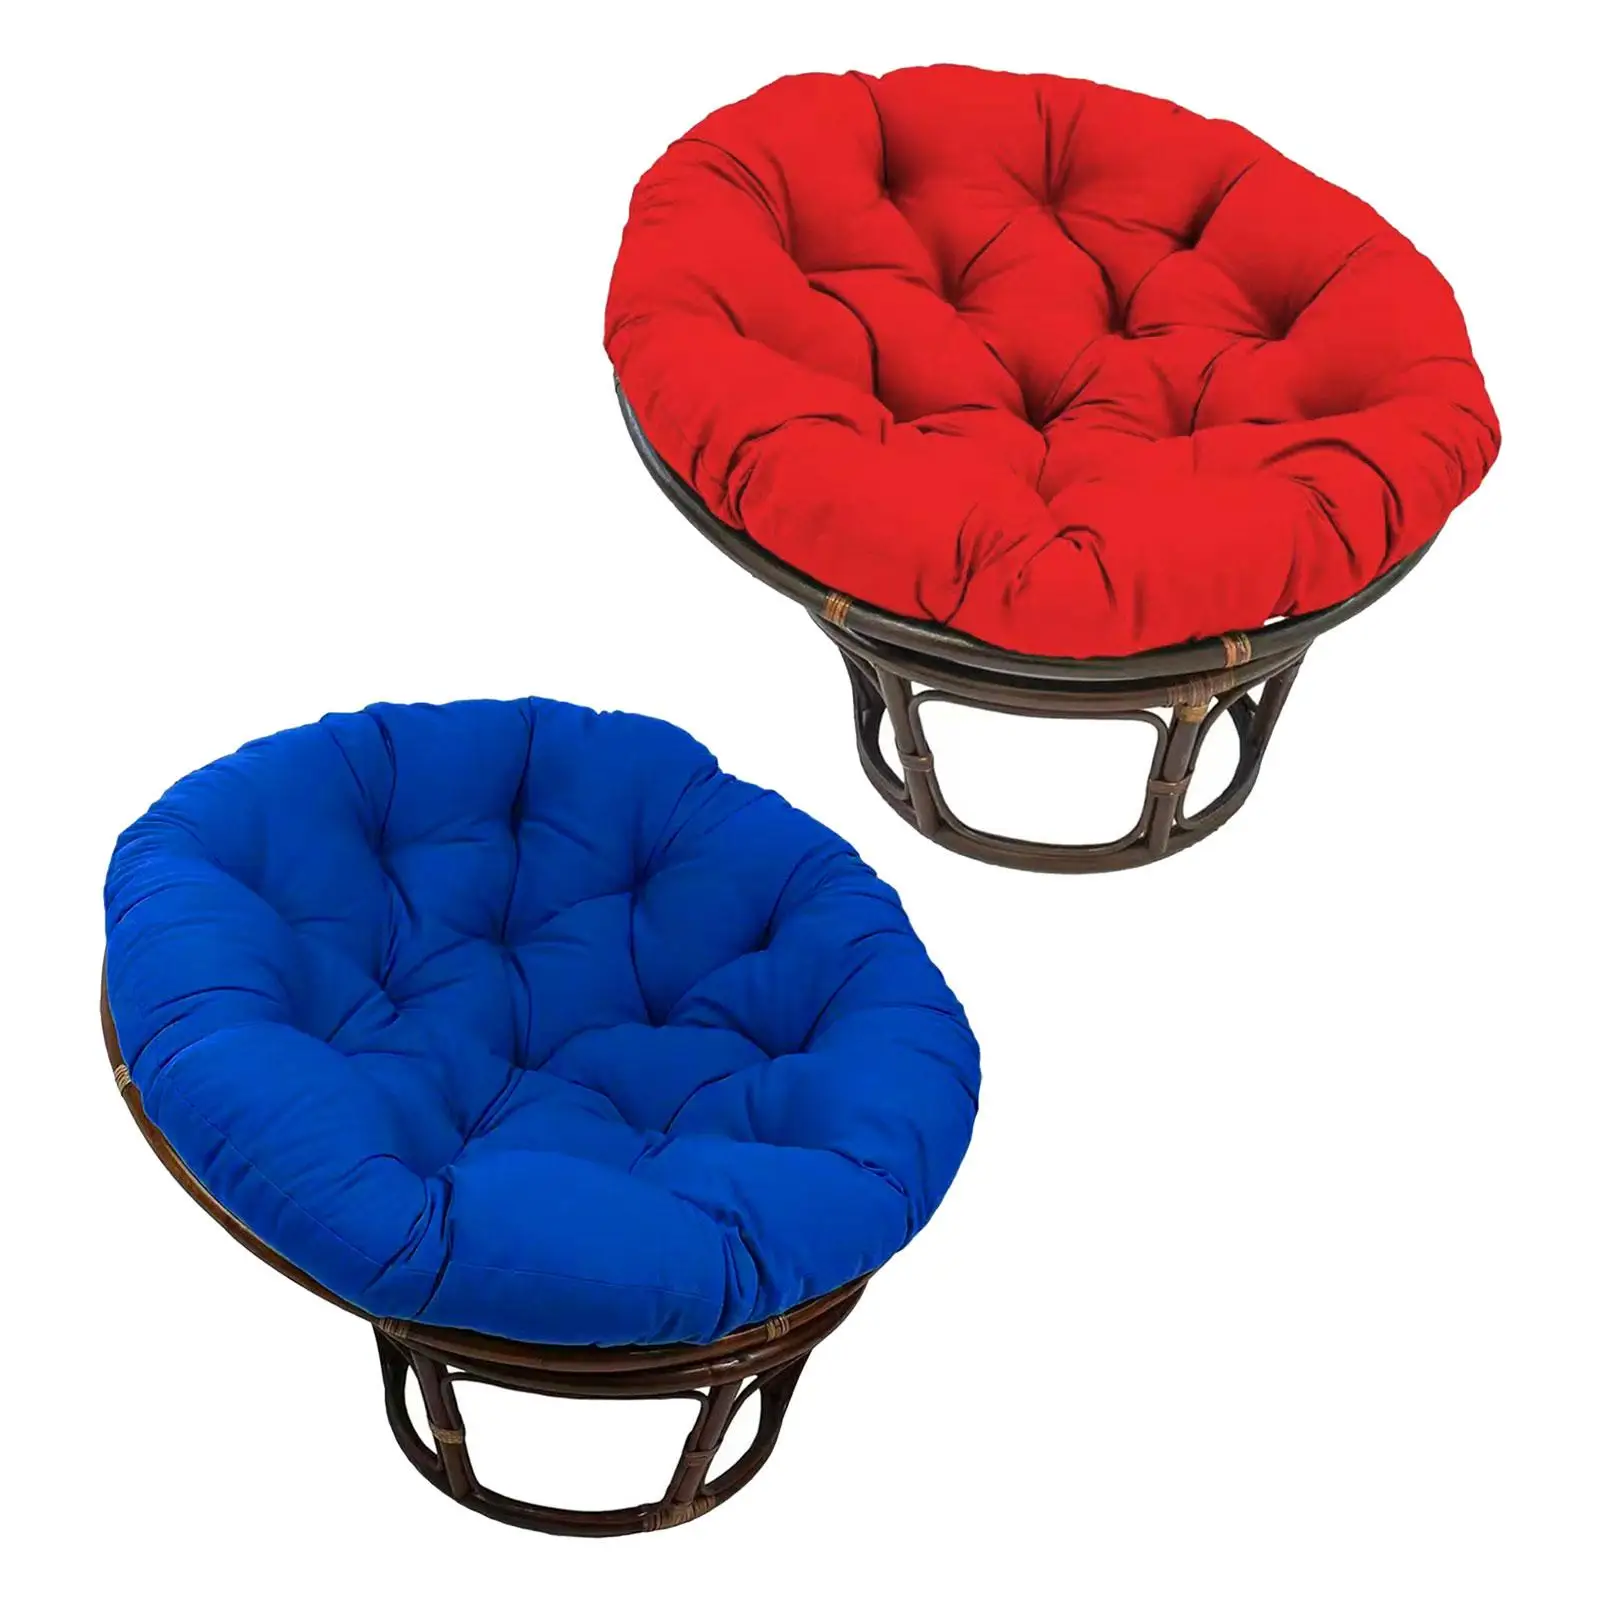 Washable Porch Swings Chair Cushion for Hammock Chair Egg Chair Indoor or Outdoor Swing Chairs Garden Offices Hanging Beds